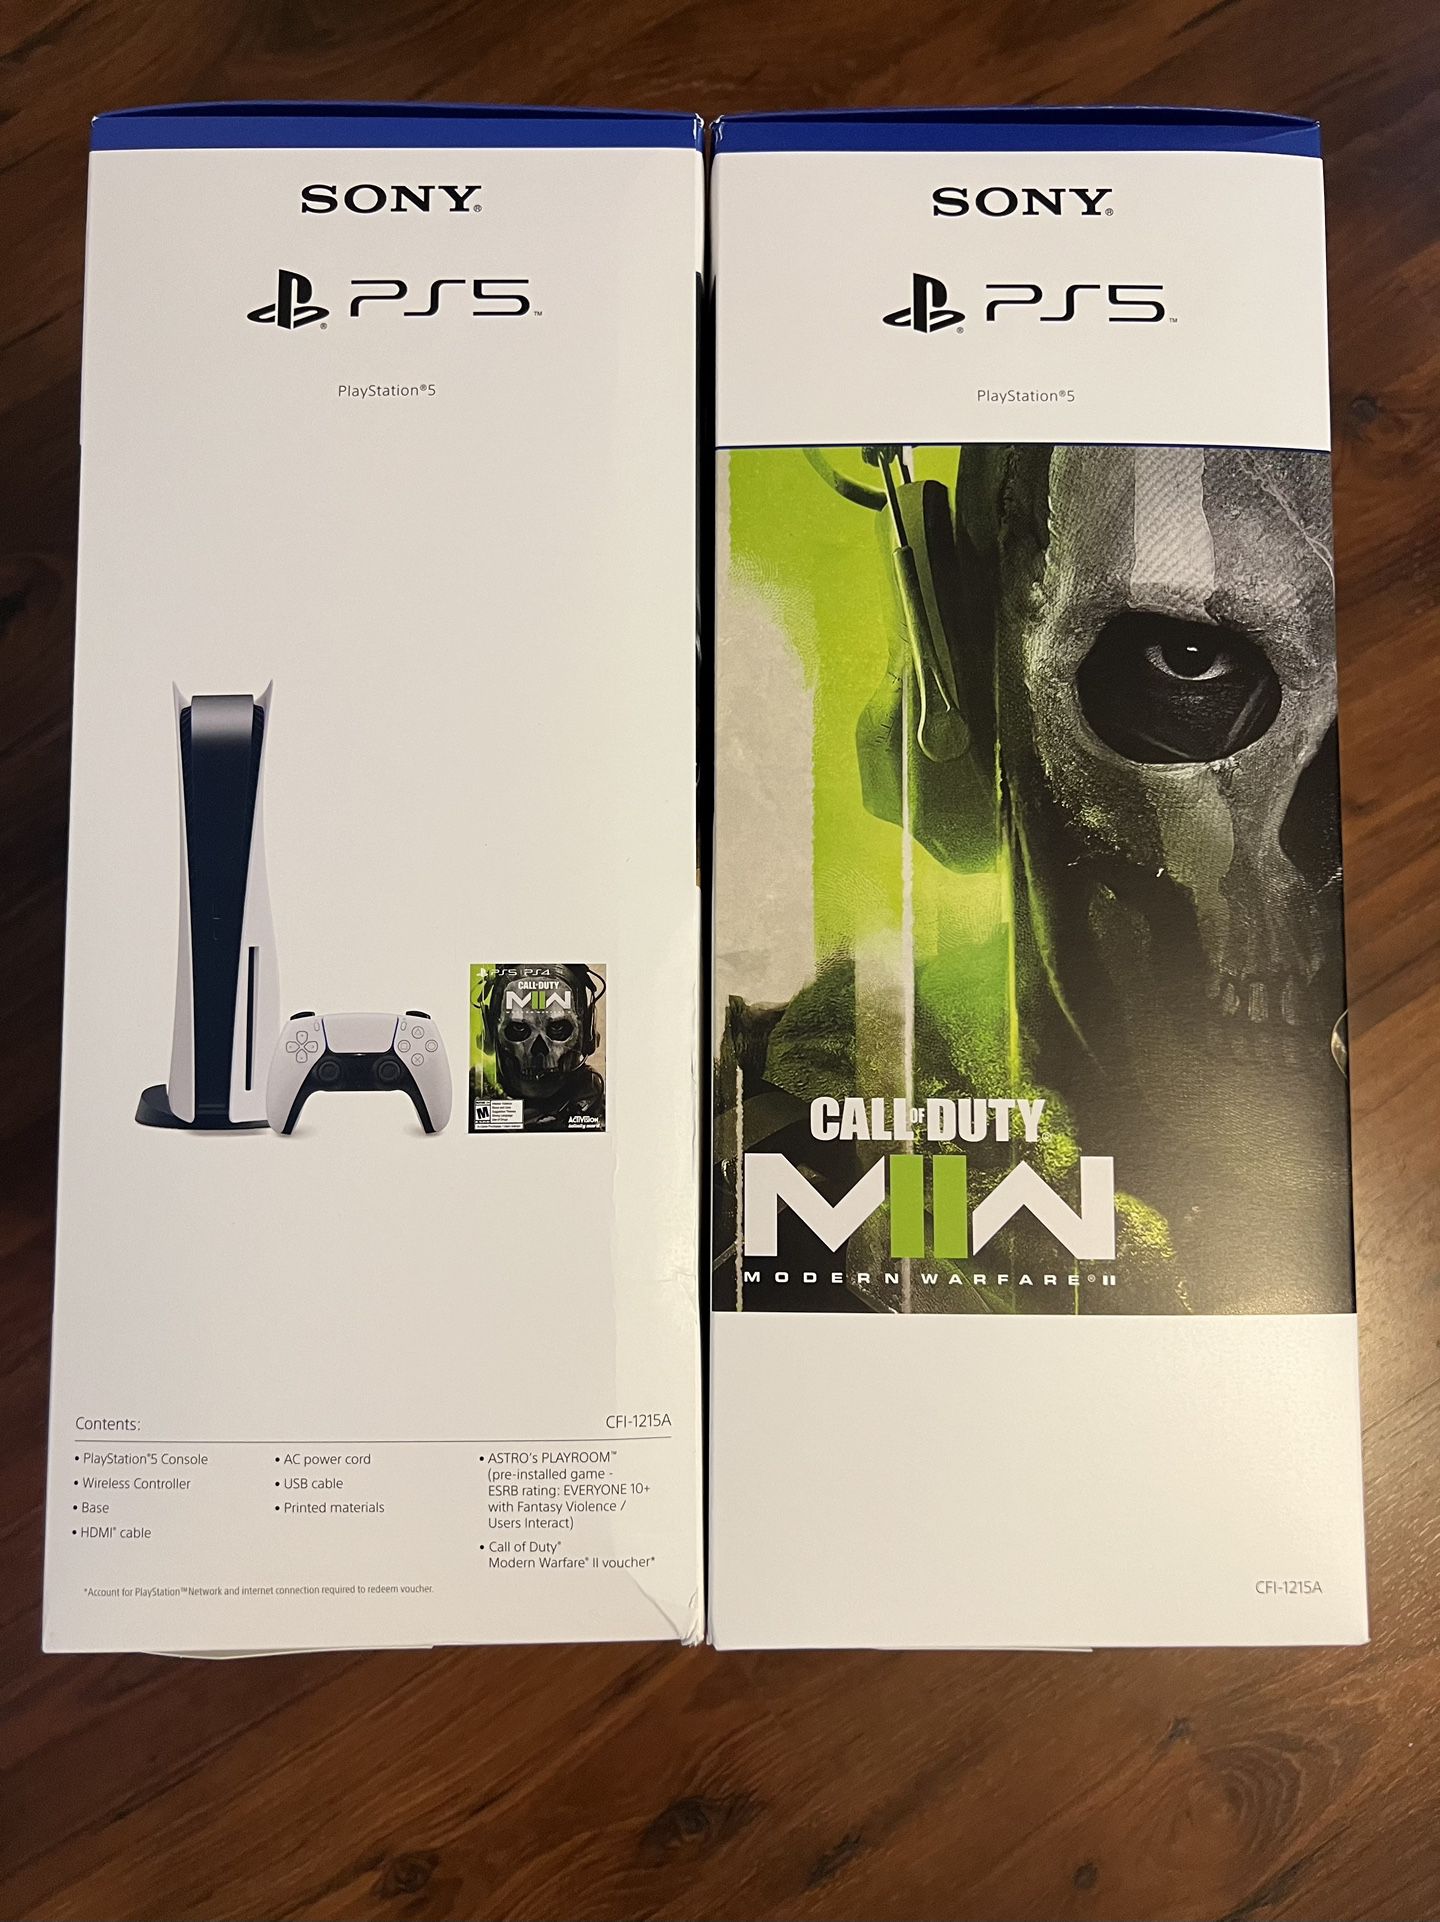 Gran Turismo 7 Launch Edition PS5 Brand New for Sale in Richmond, CA -  OfferUp